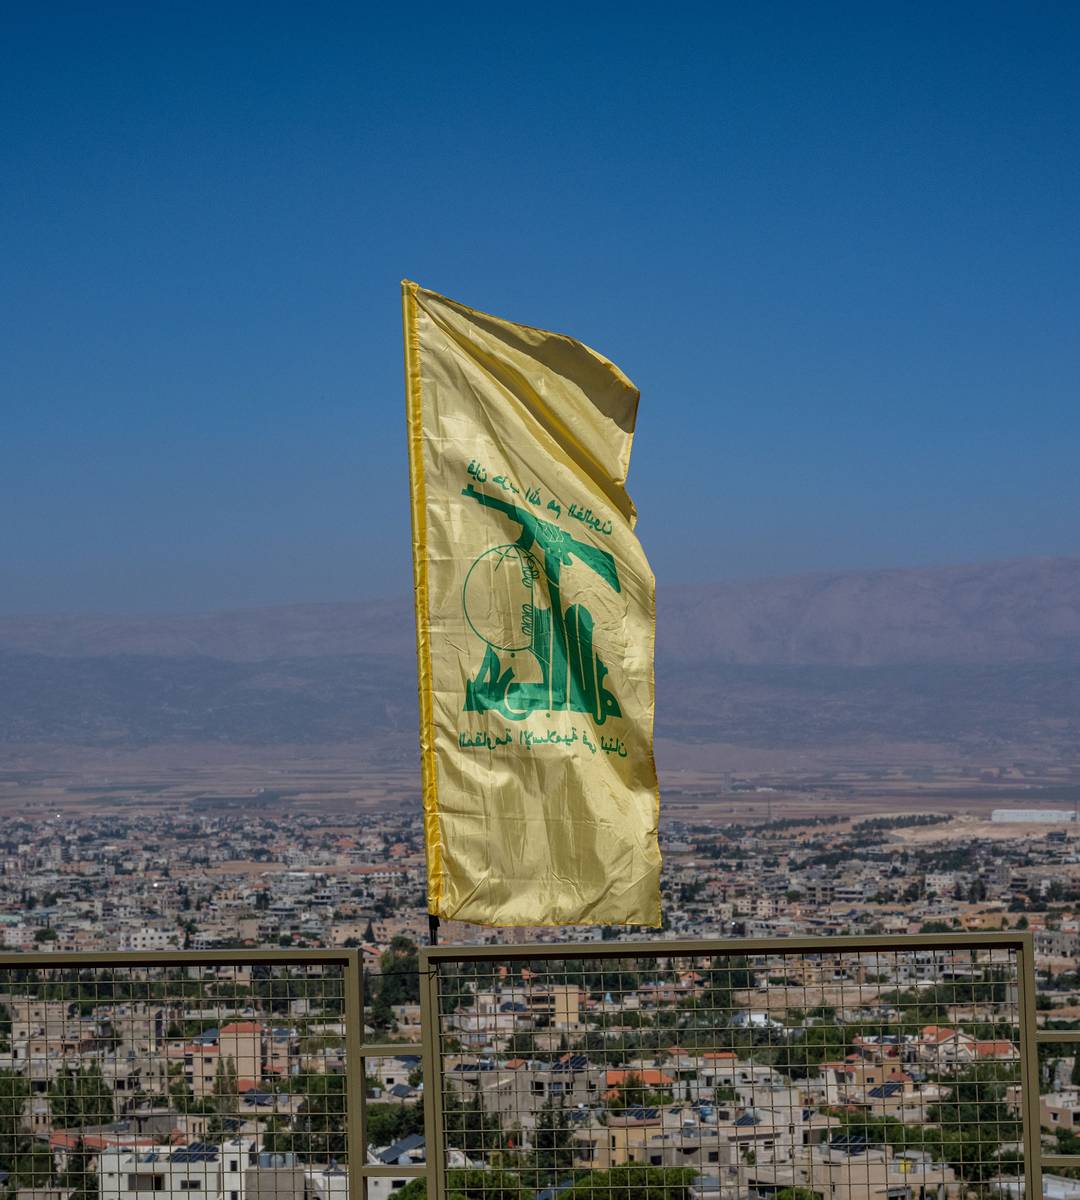 A Hezbollah flag flies at the new Baalbek Tourist Museum, which showcases Hezbollah's 41-year history of fighting Israel and resisting Western influence in the Middle East, on September 1, 2023 in the hills above the ancient Bekaa Valley town of Baalbek, Lebanon